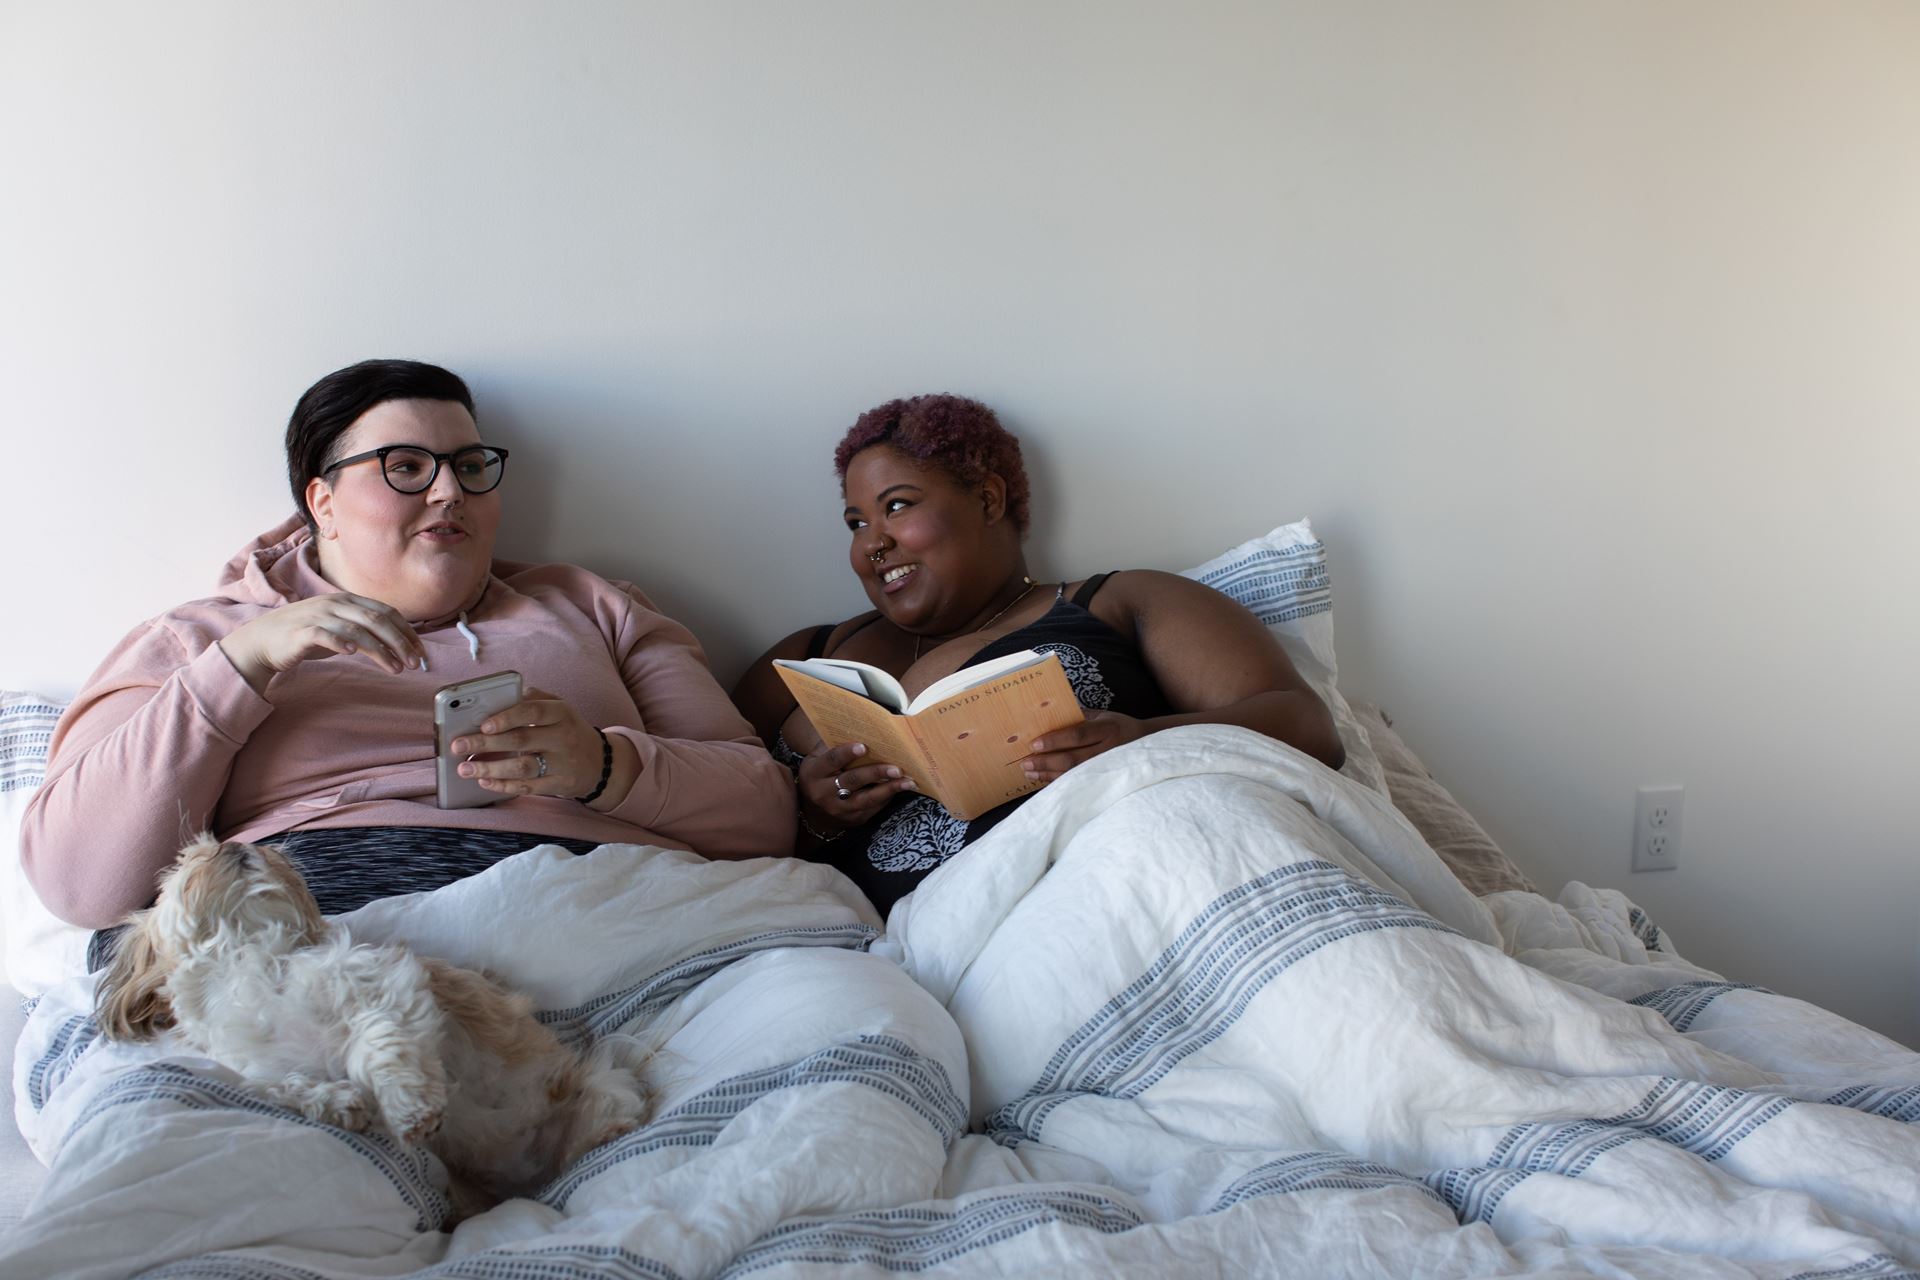 Two larger women sitting up in bed. One is light-skinned, holds a phone, and has a small dog lying in her lap. The other is darker-skinned and holds an open book.